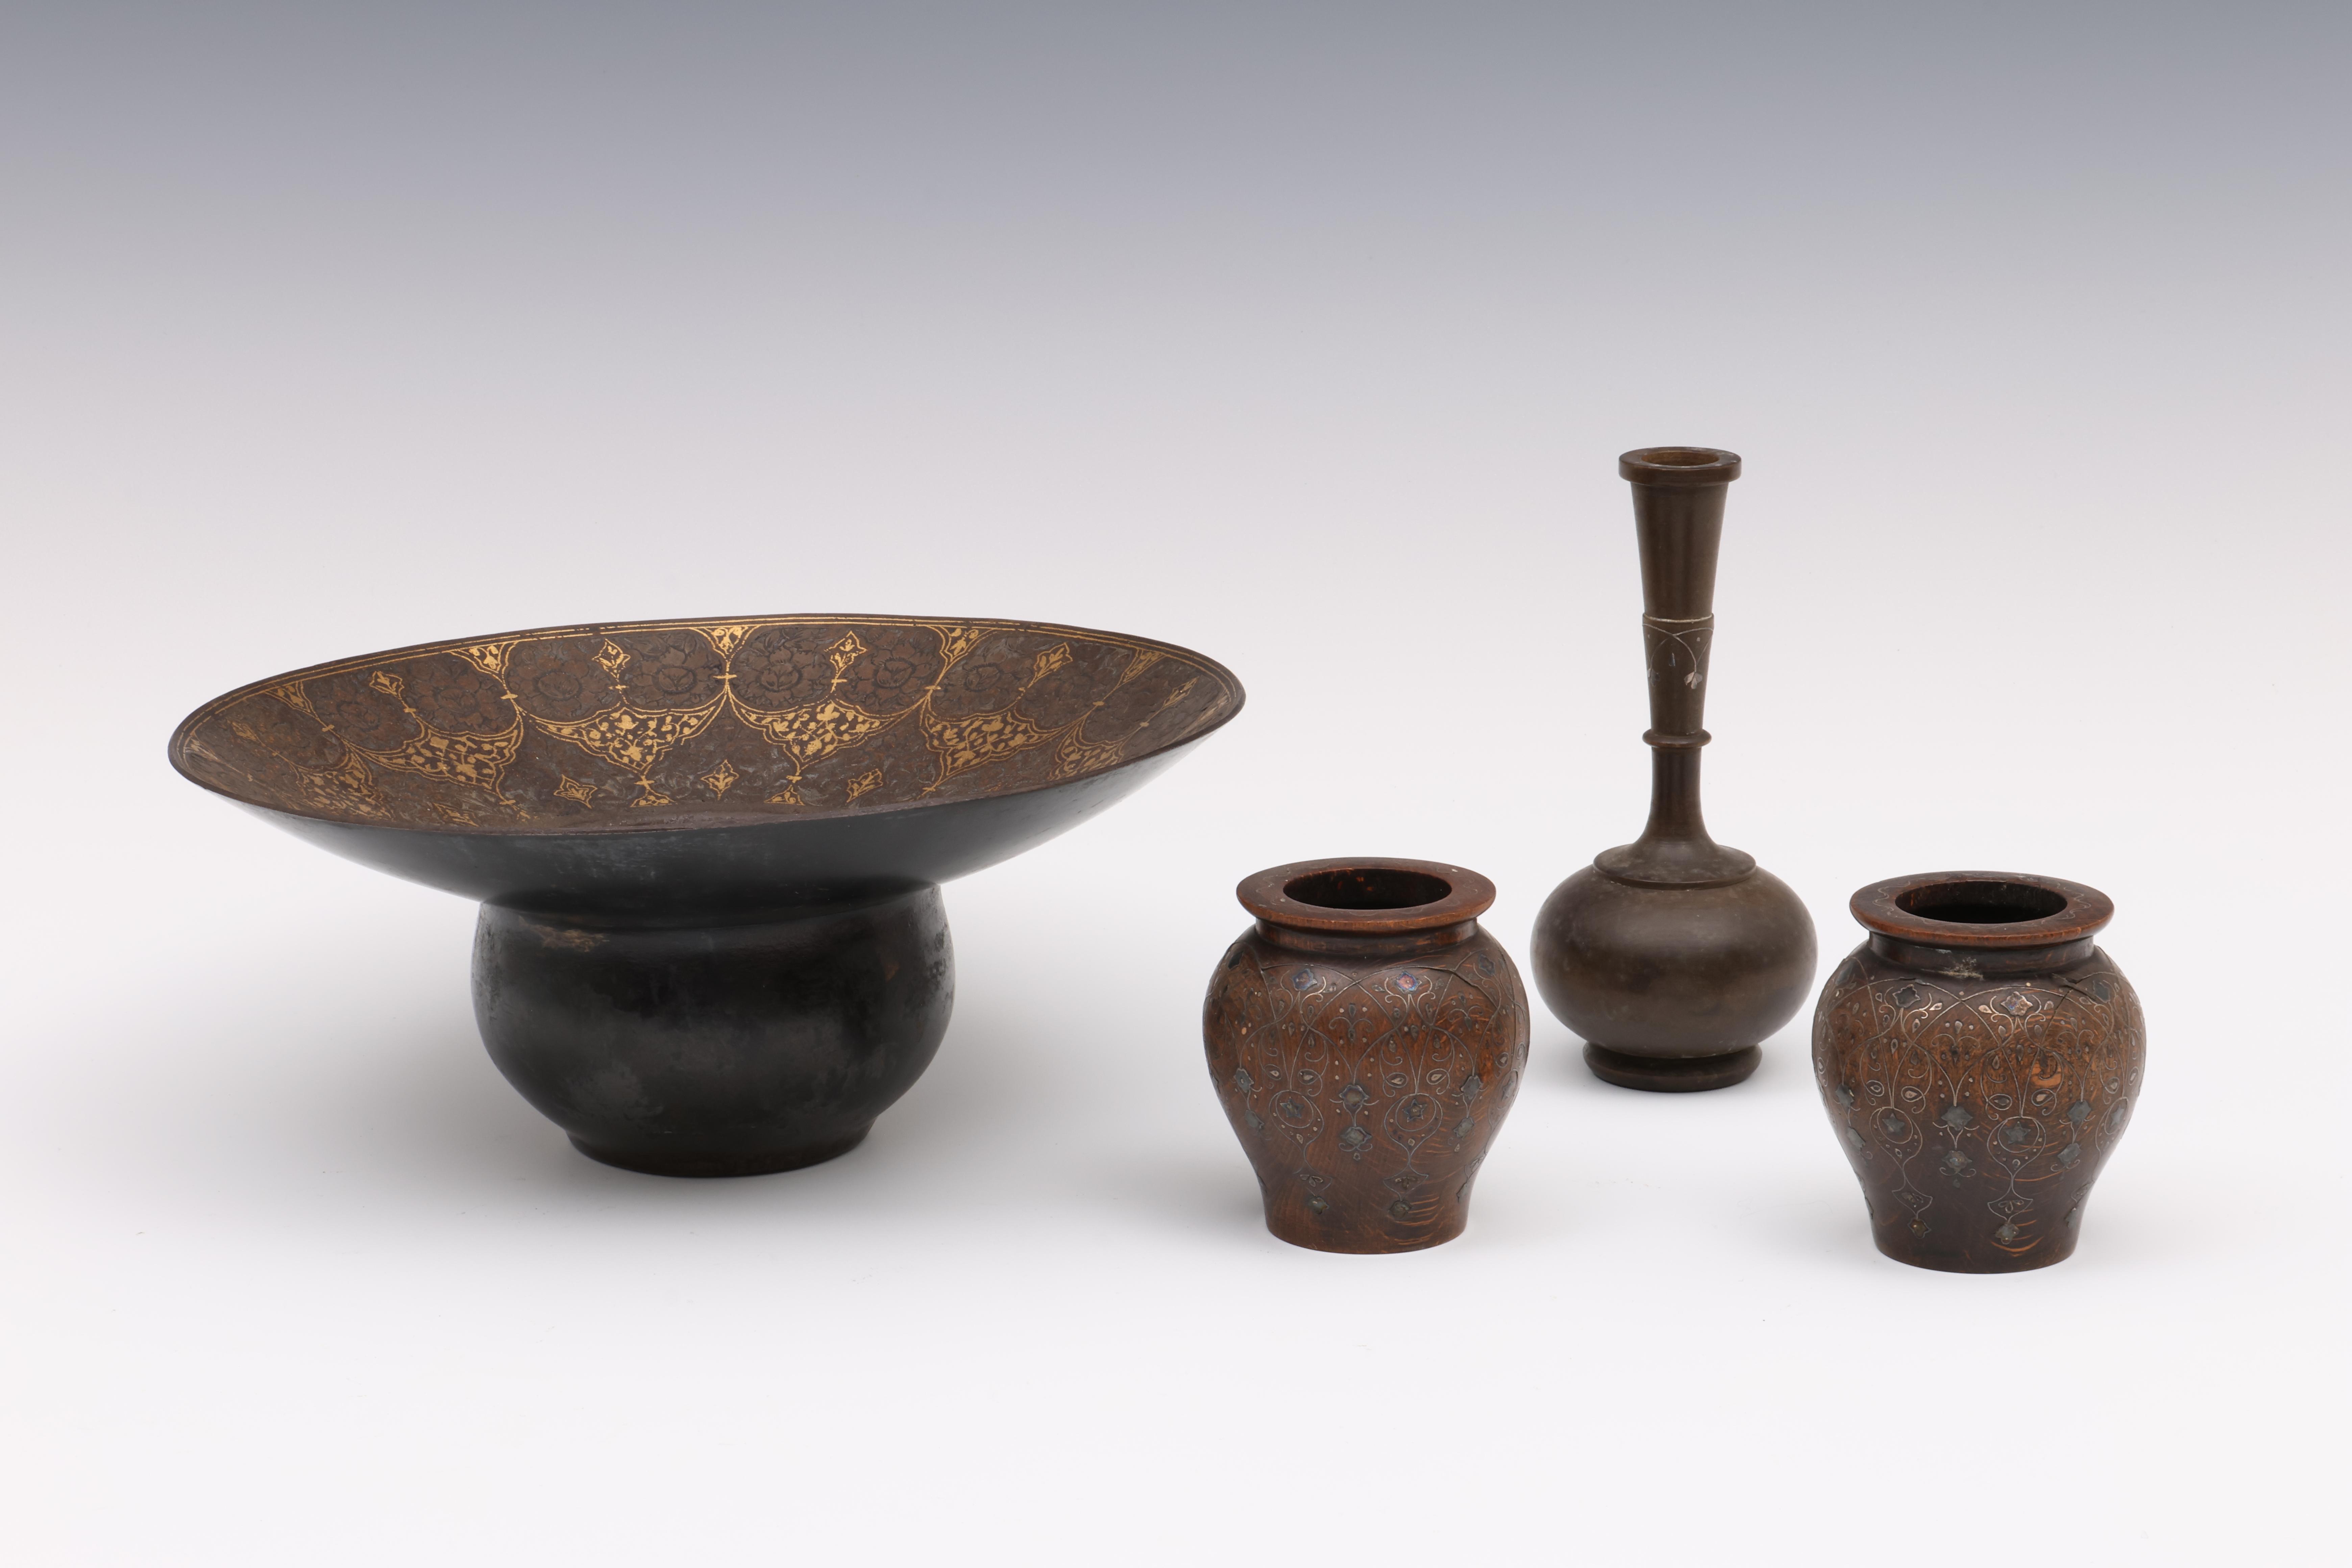 Turkey, Ottoman, a pair of wooden pots and a vase, possibly 19th century - Image 3 of 3